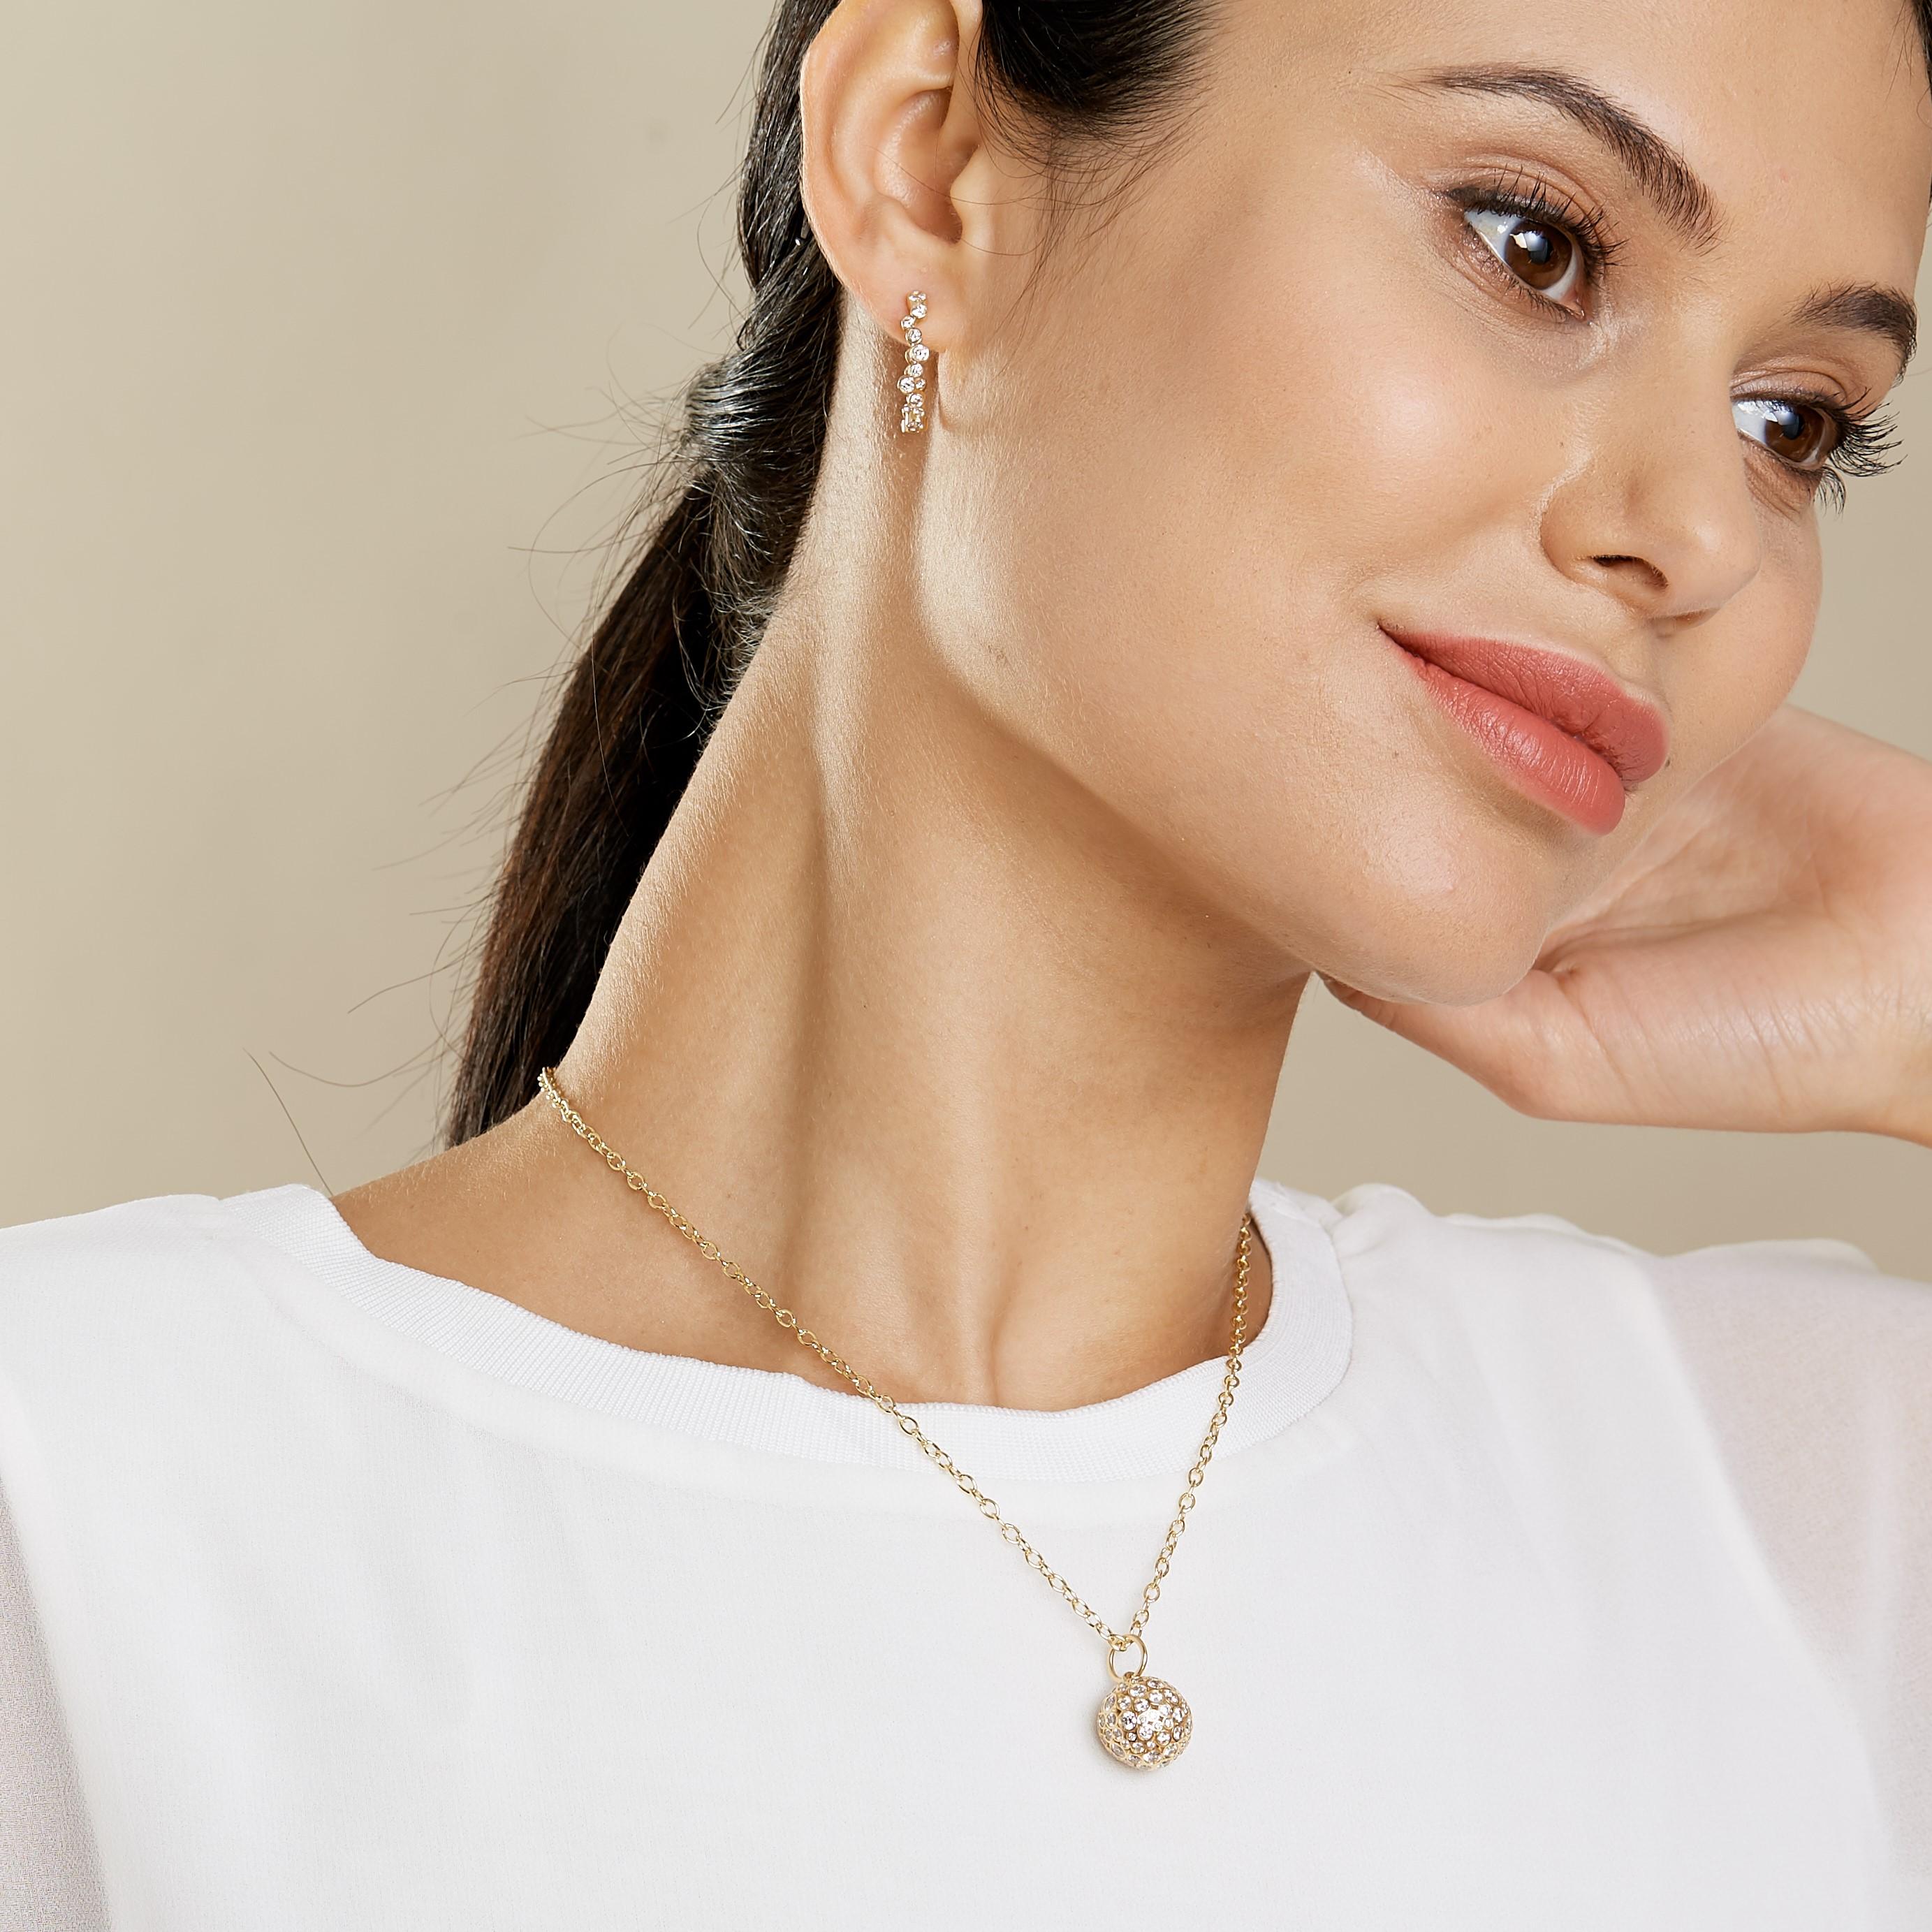 Created in 18 karat Yellow Gold
Diamonds 3cts approx
Ball Pendant with diamond set in Each bezel
Intricate workmanship
Chain sold separately
Limited edition

Intricately crafted from 18 karat Yellow Gold, this limited edition ball pendant is a